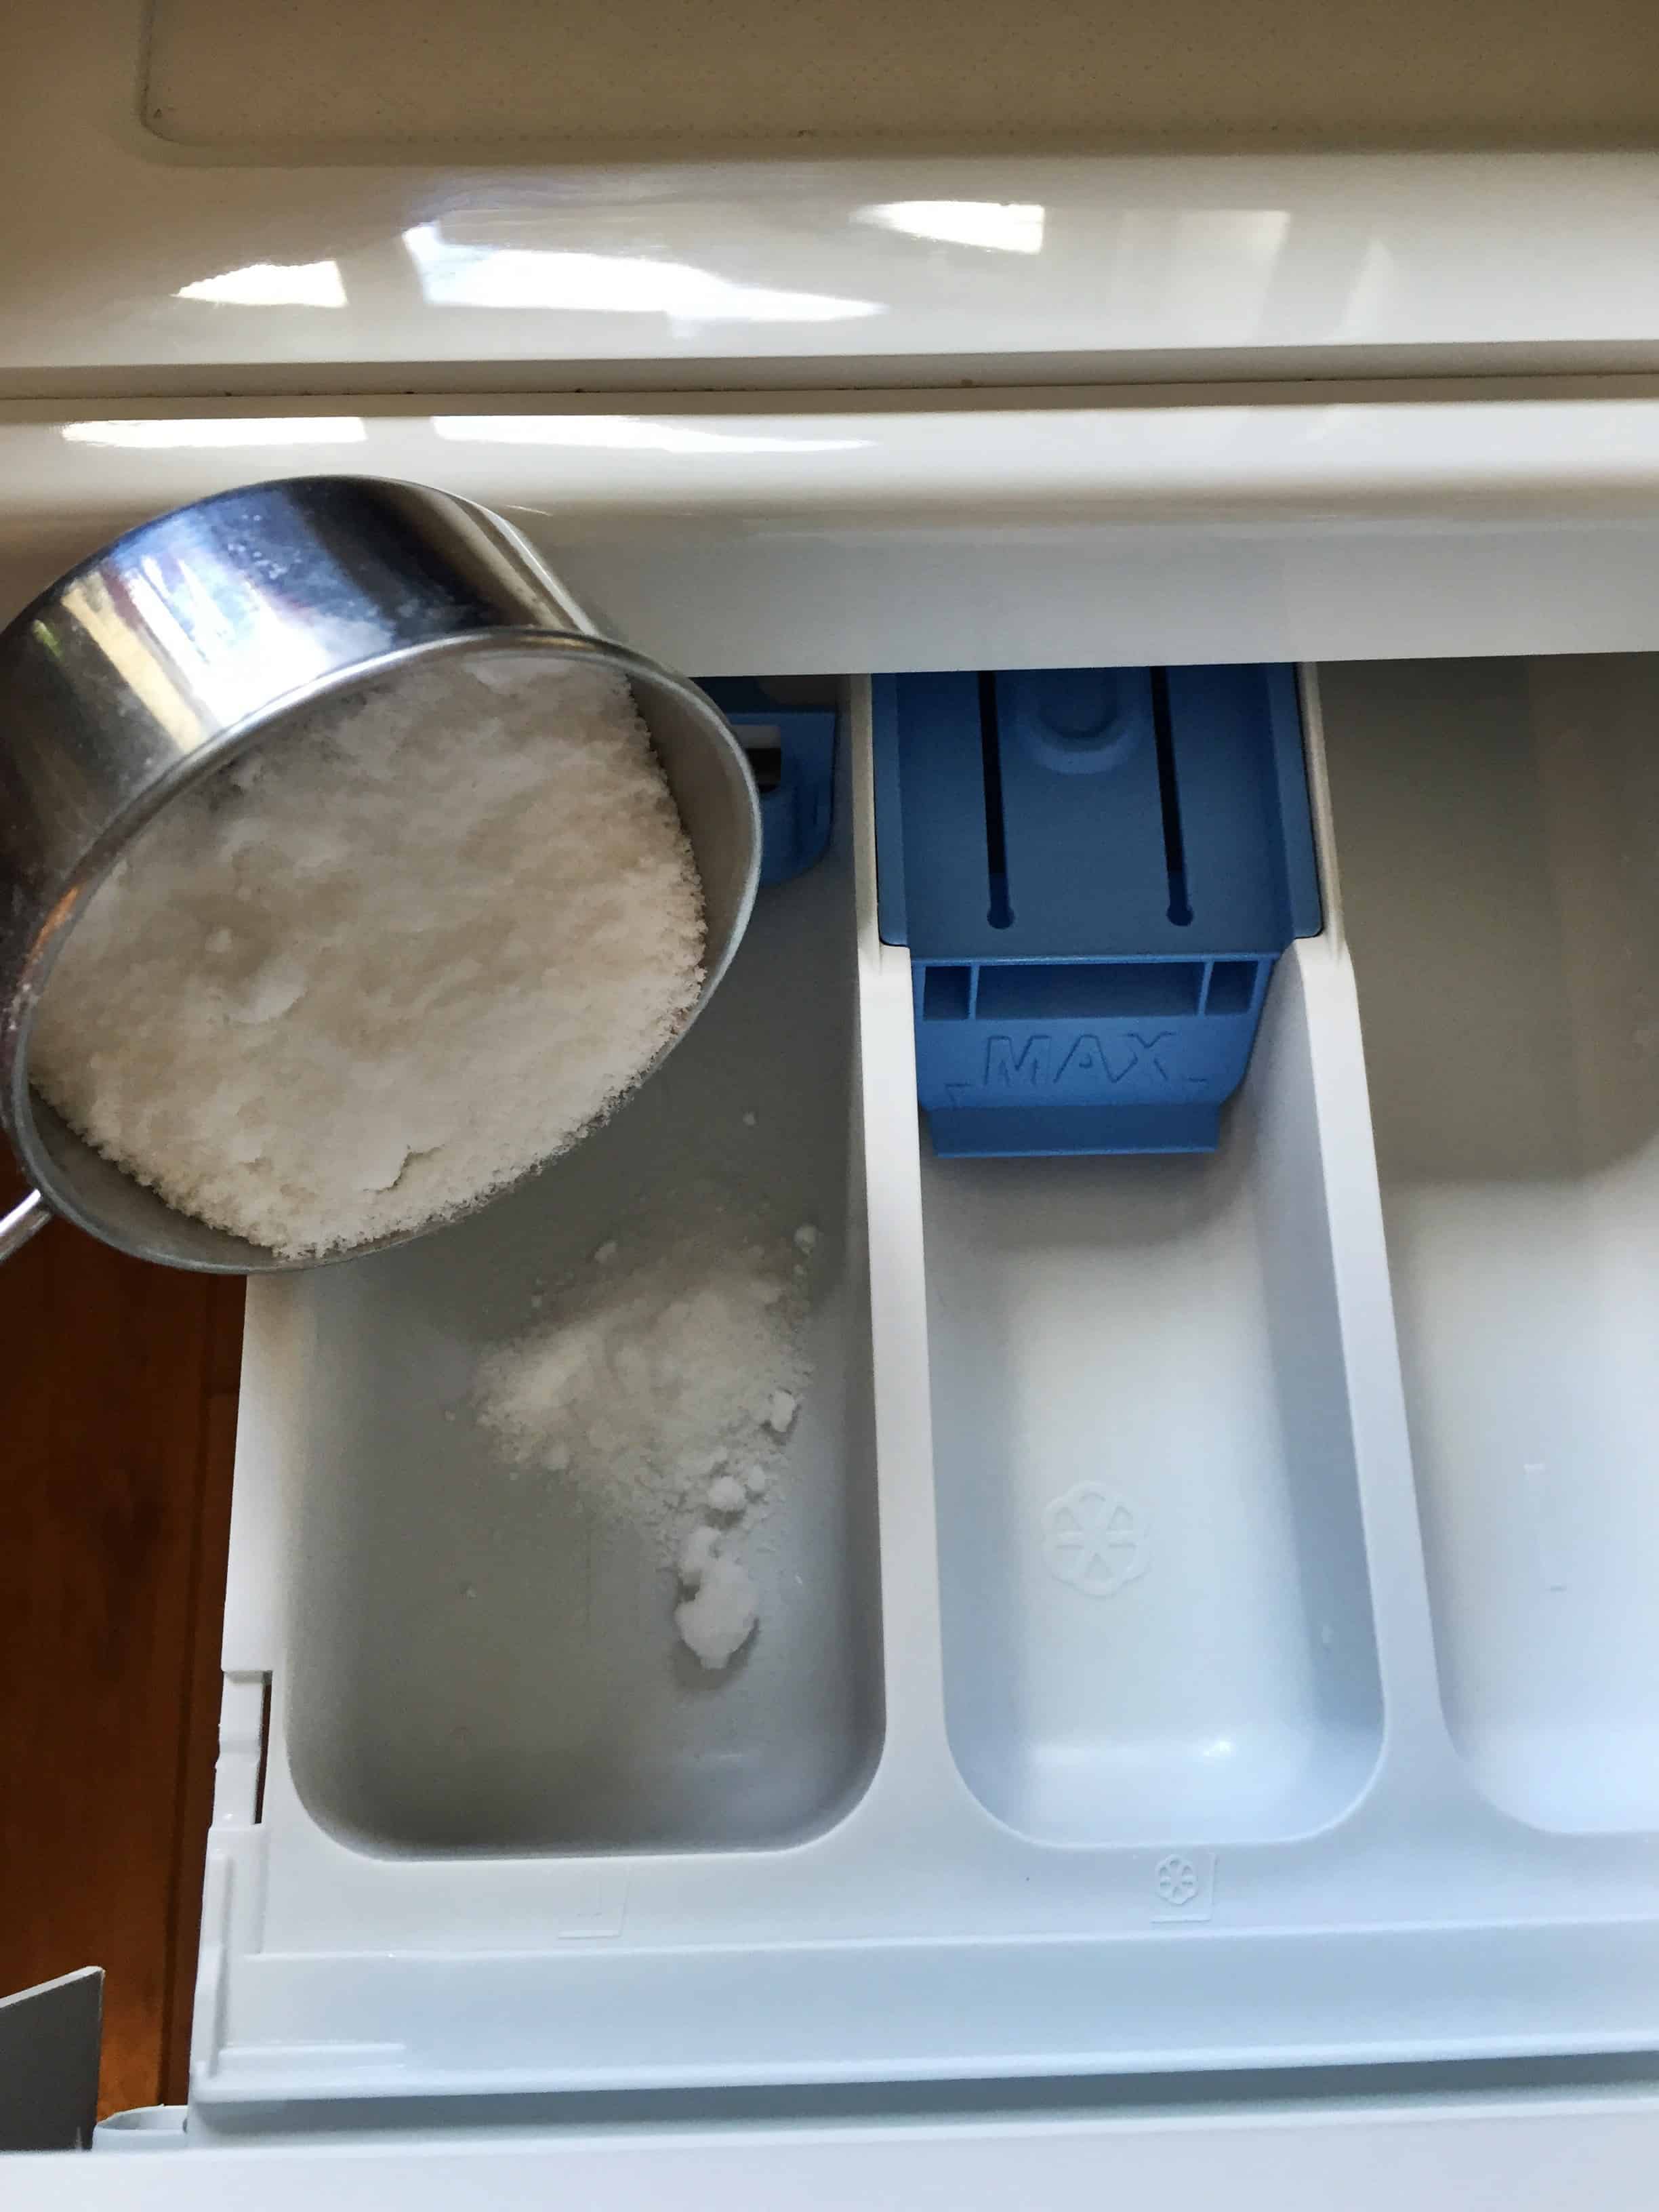 Cleaning with soda crustals and dish washing soap